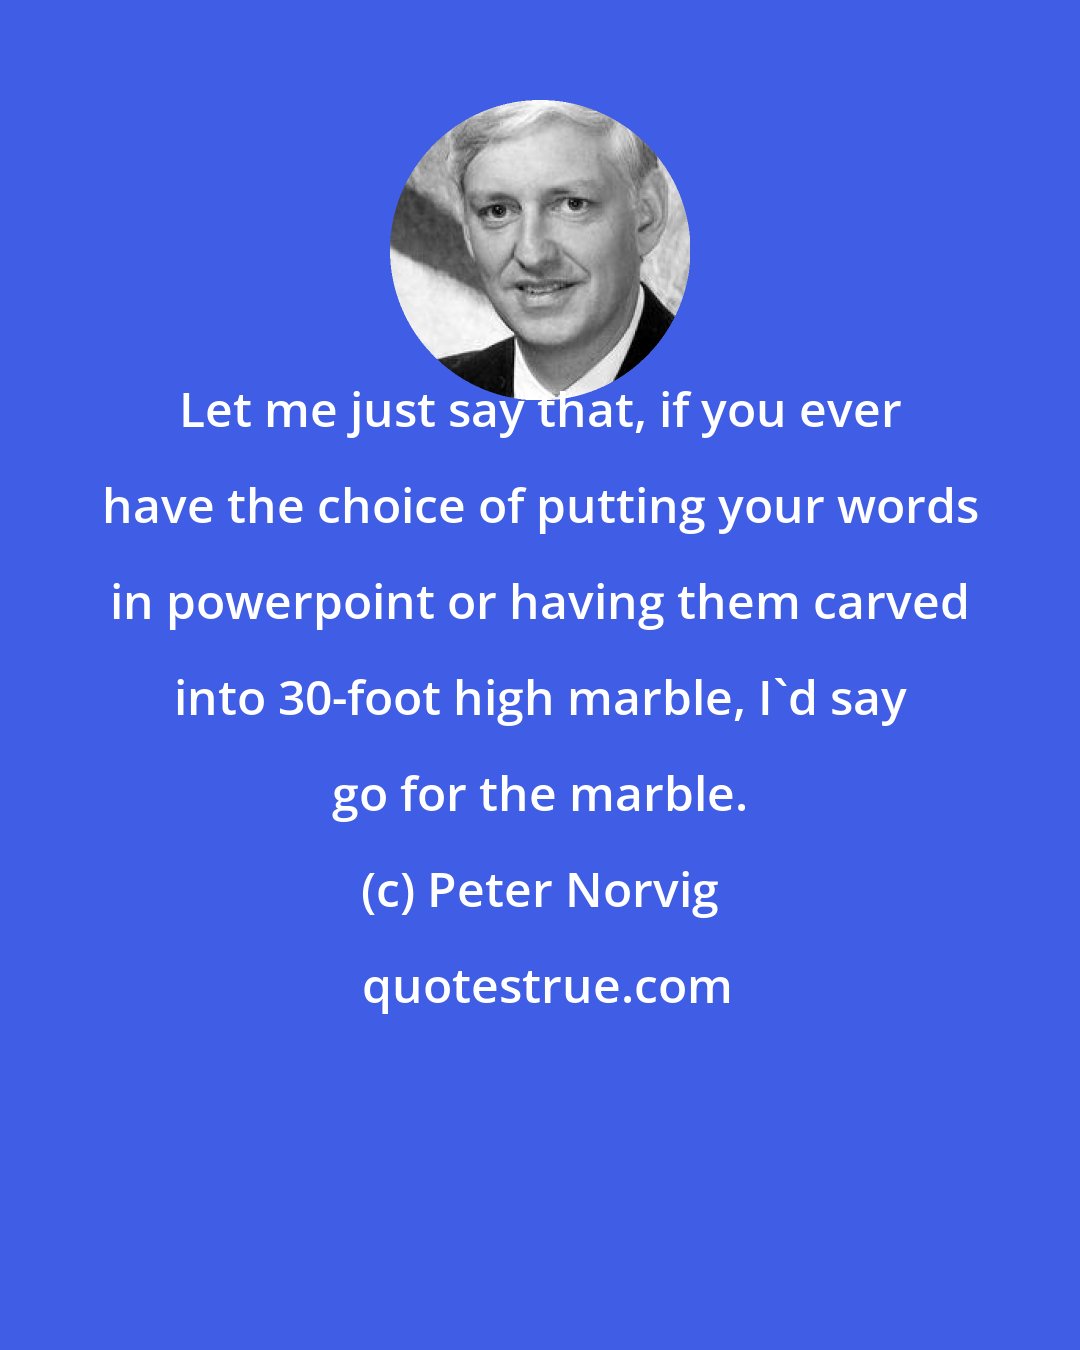 Peter Norvig: Let me just say that, if you ever have the choice of putting your words in powerpoint or having them carved into 30-foot high marble, I'd say go for the marble.